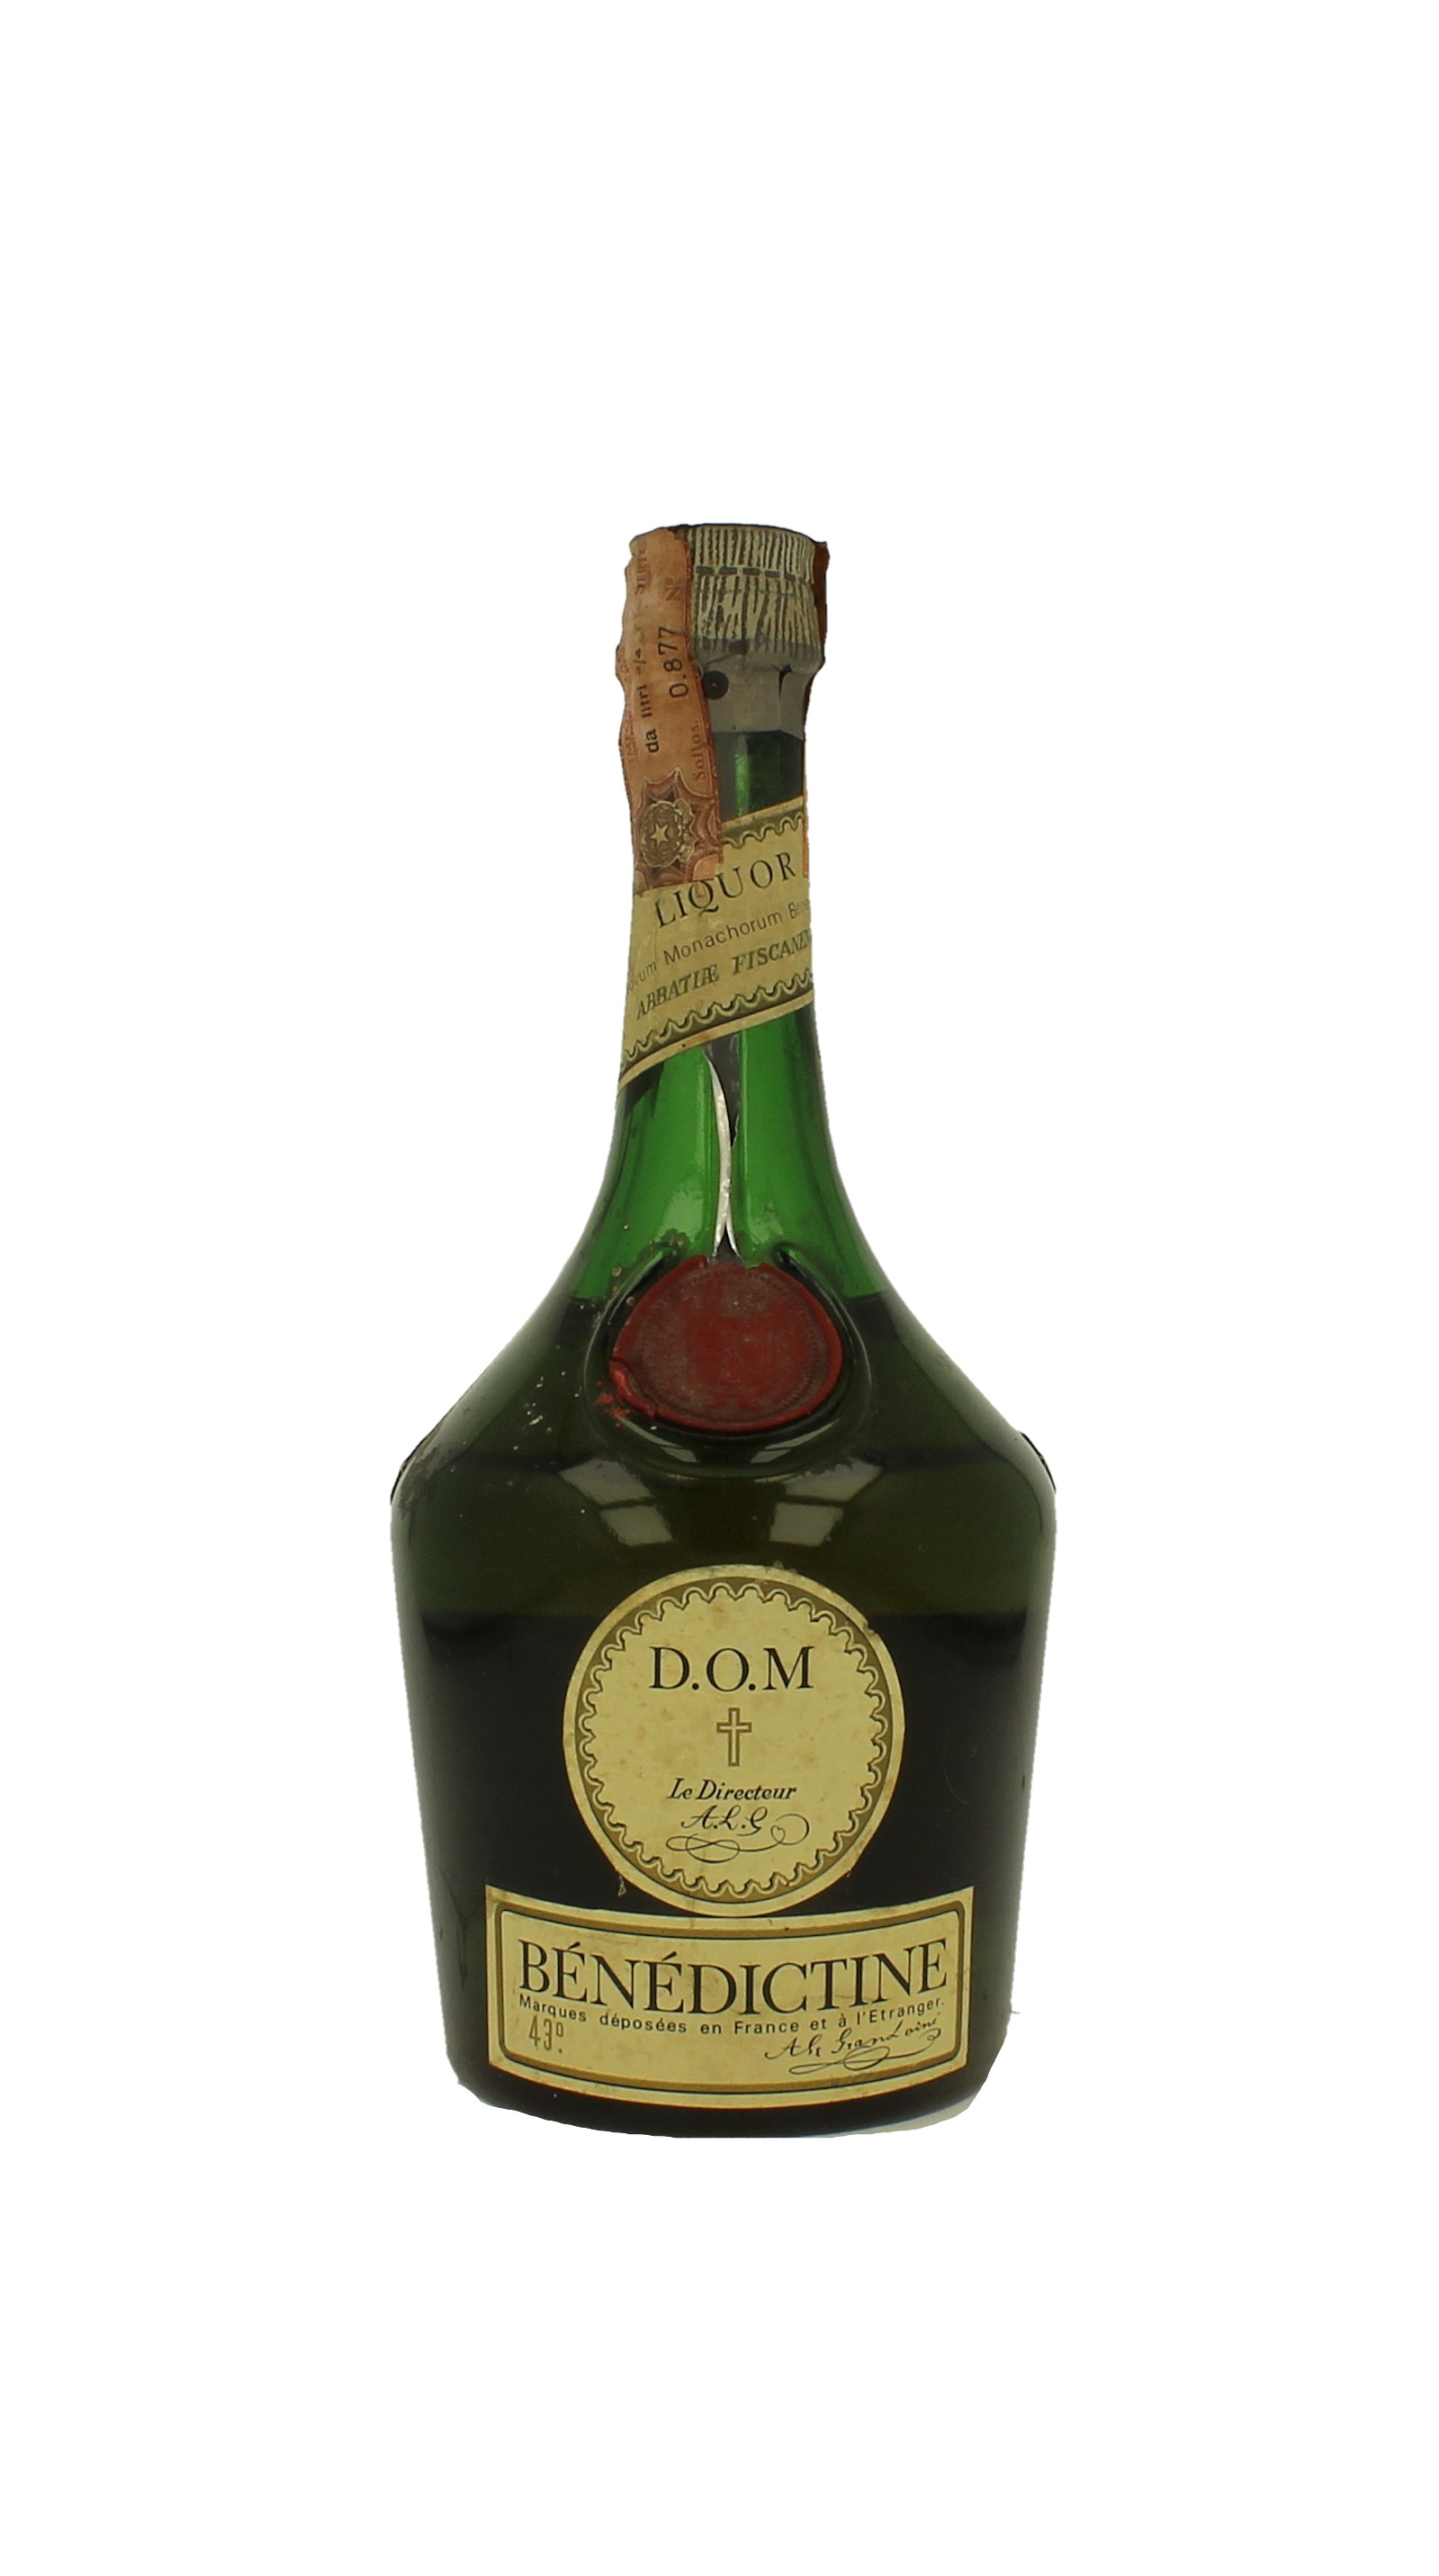 D.O.M. BENEDECTINE Bot 60/70's 75cl 43% OLD LIQUOR - Products - Whisky  Antique, Whisky & Spirits